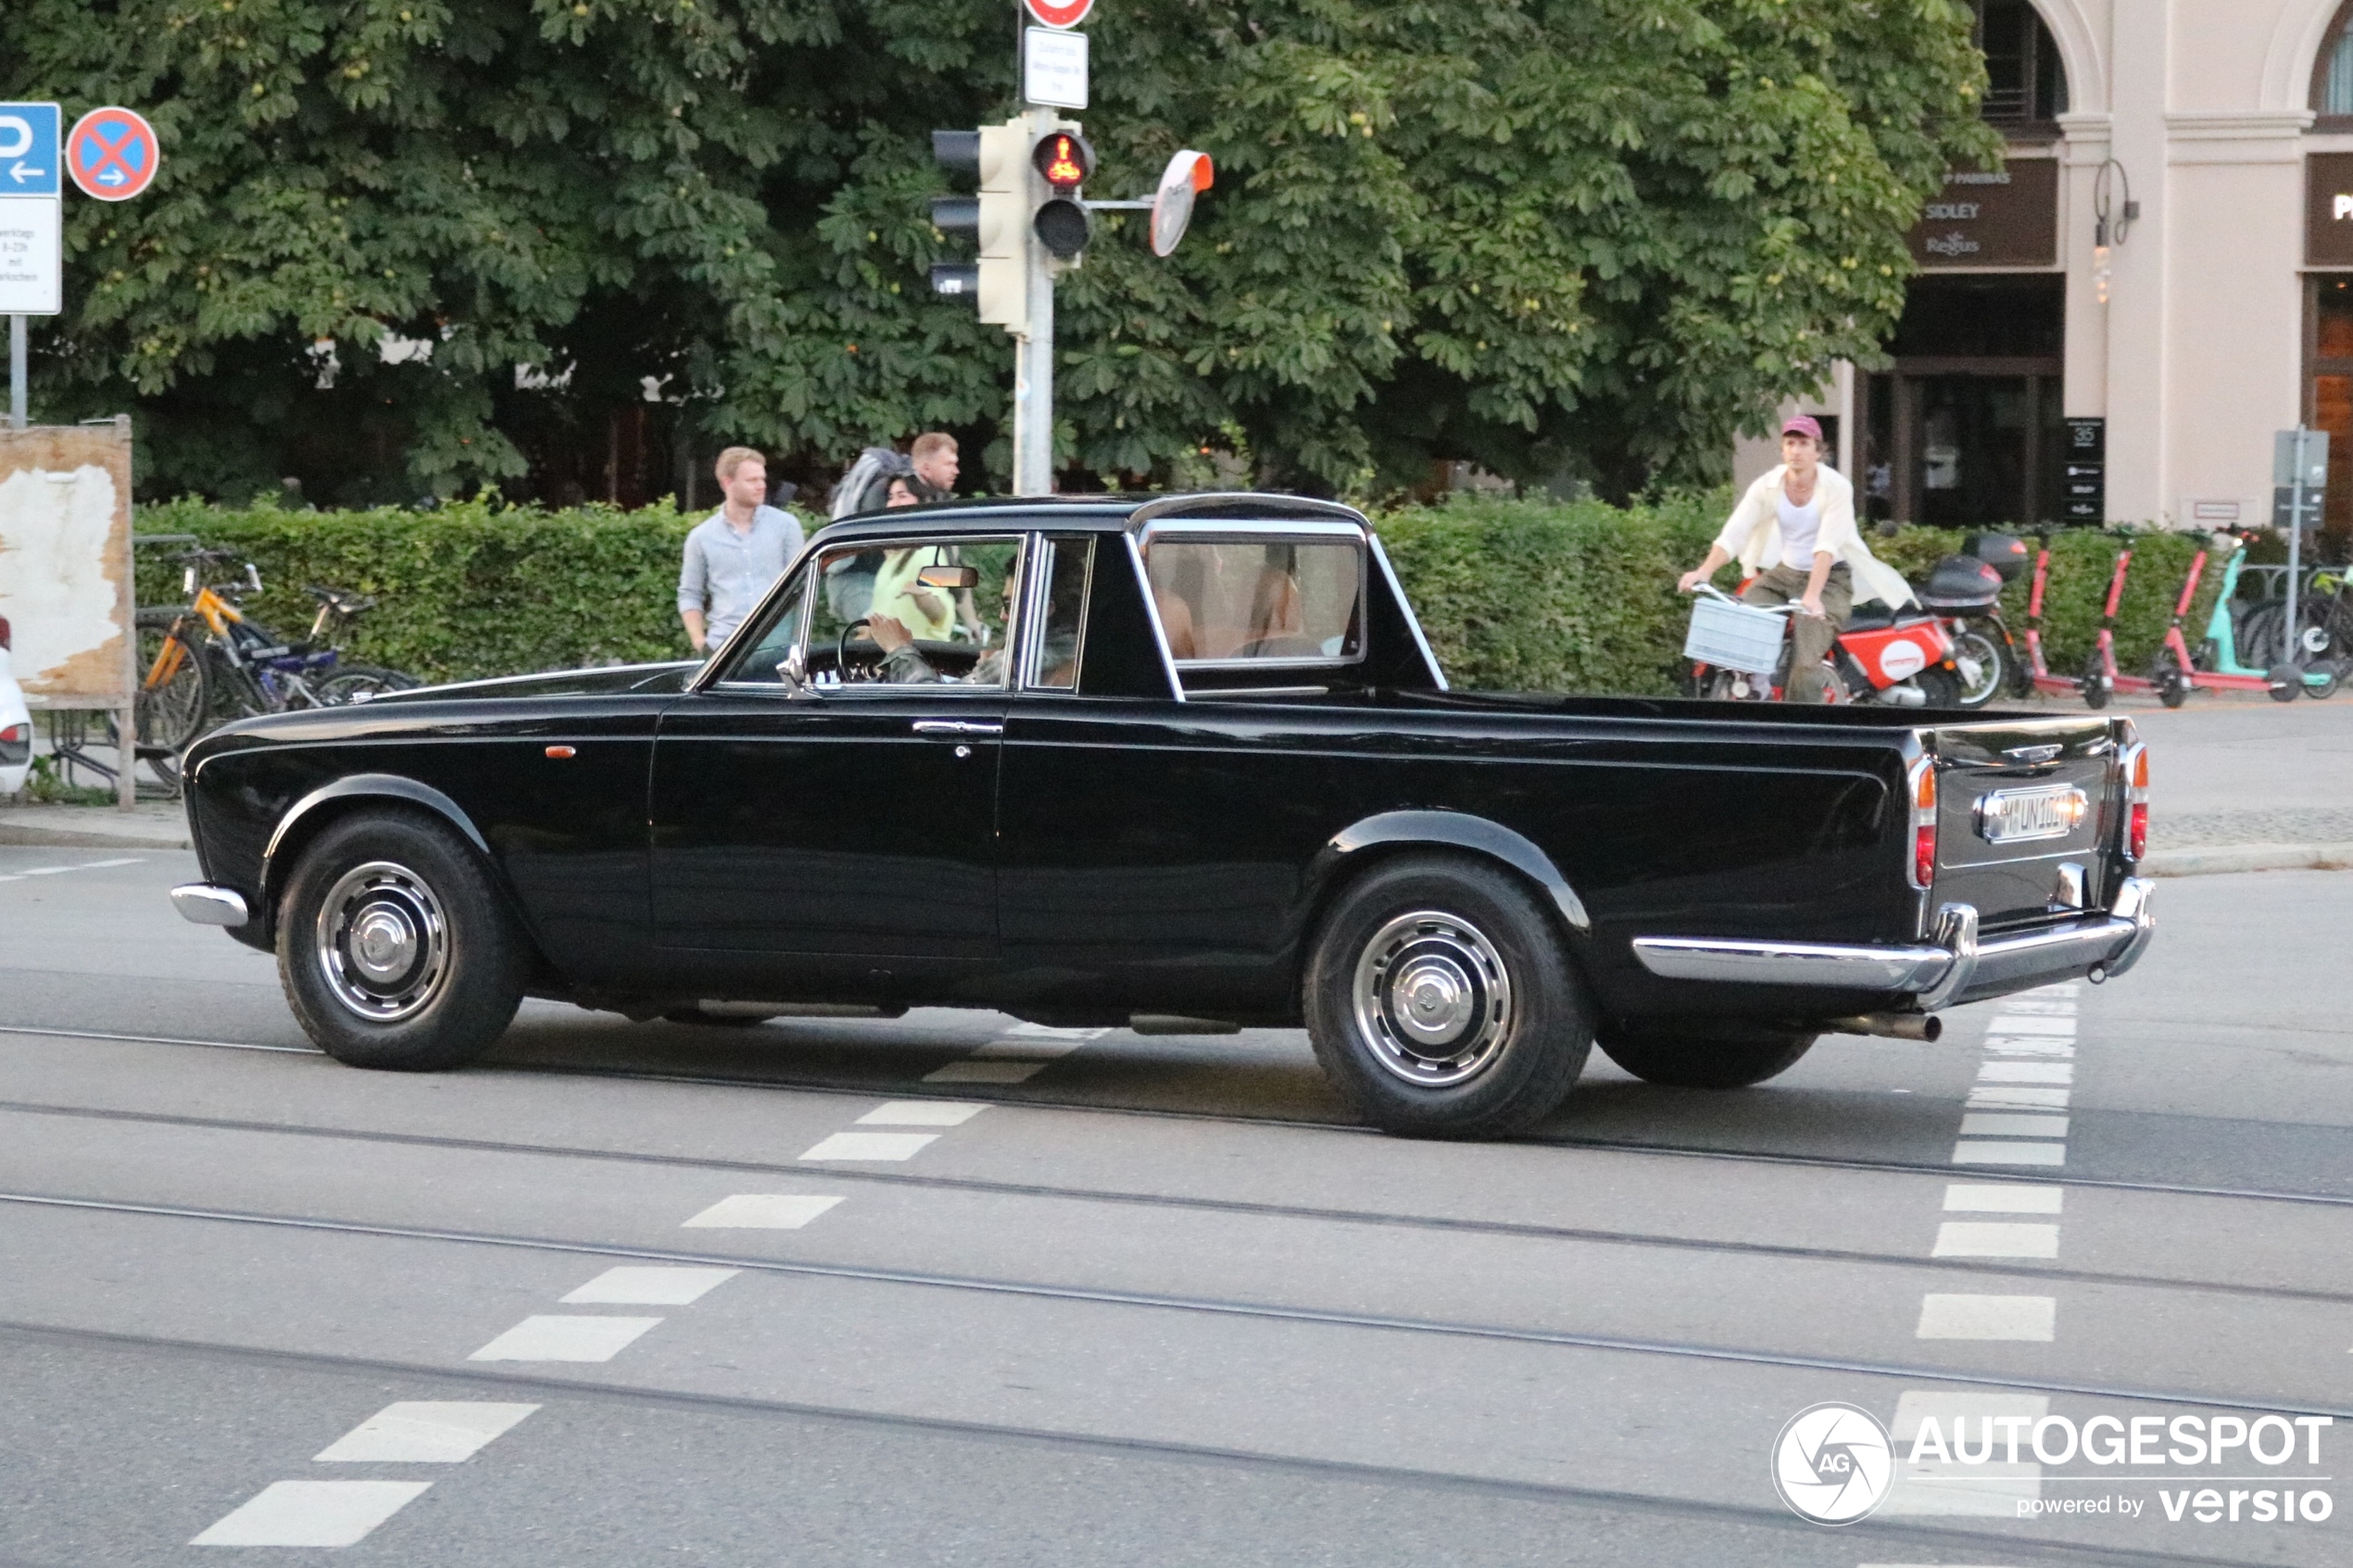 A rare Rolls-Royce Silver Shadow Pick-up shows up in Munich